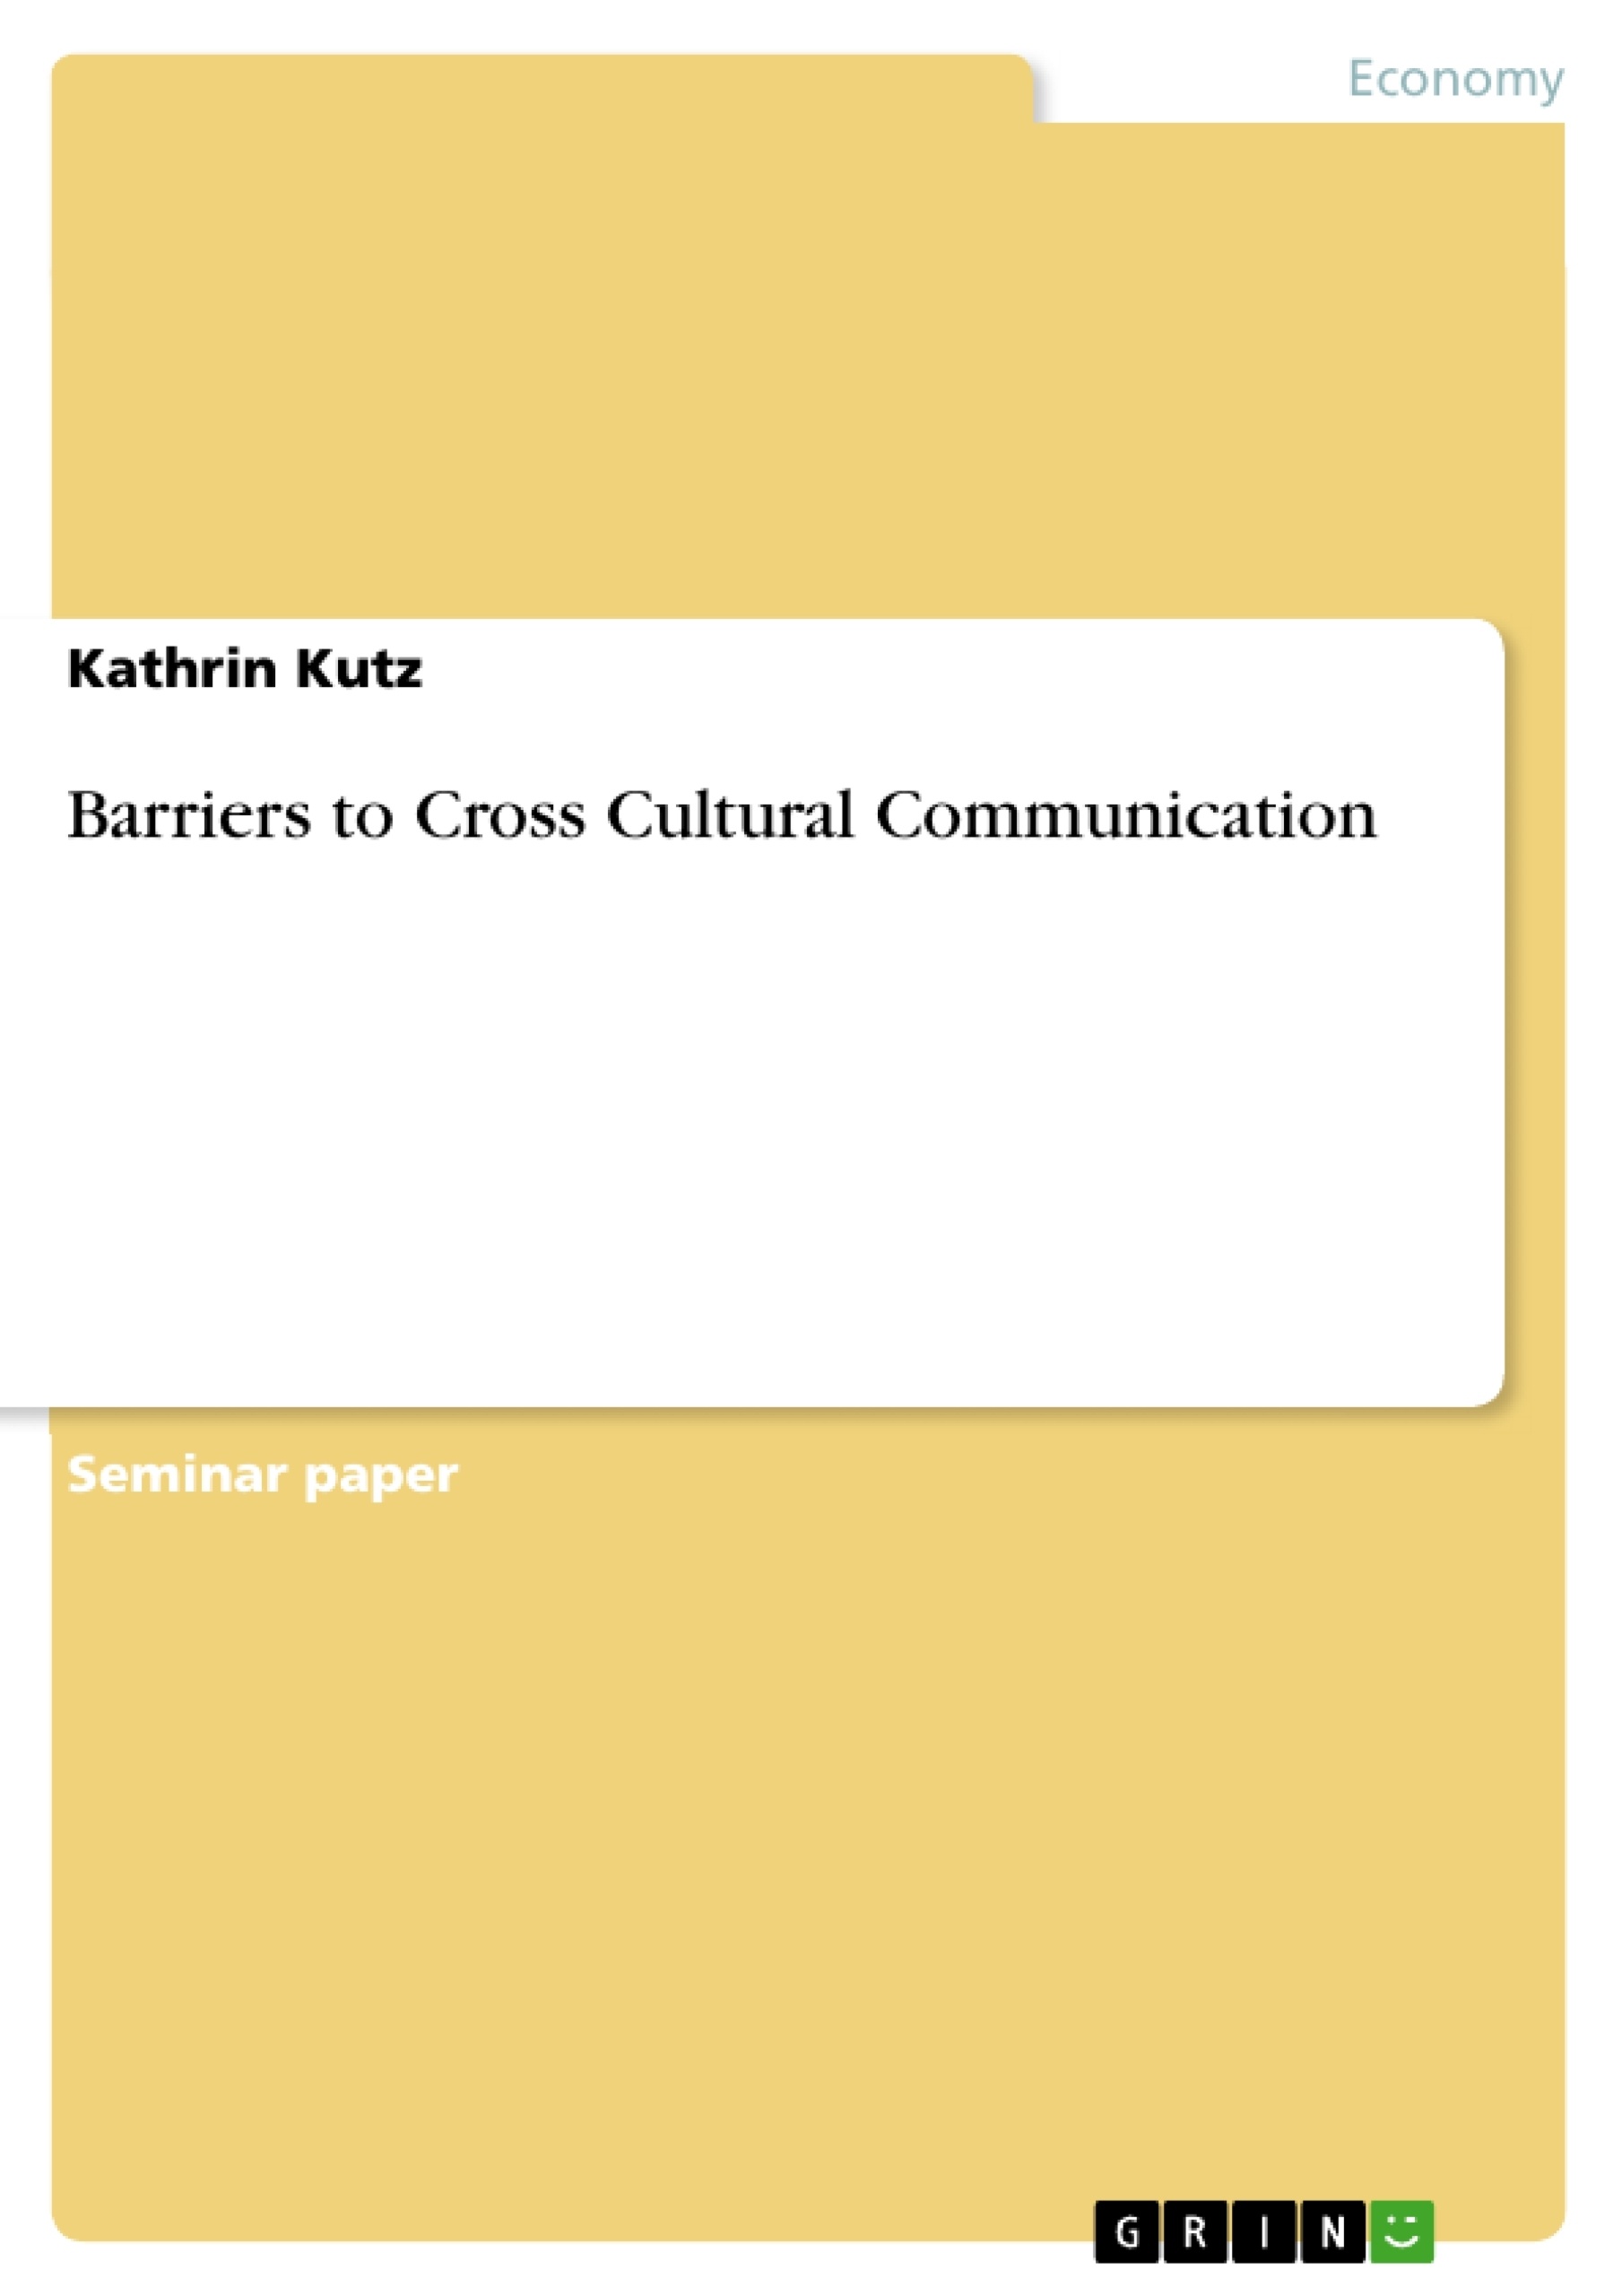 Research paper on communication barriers